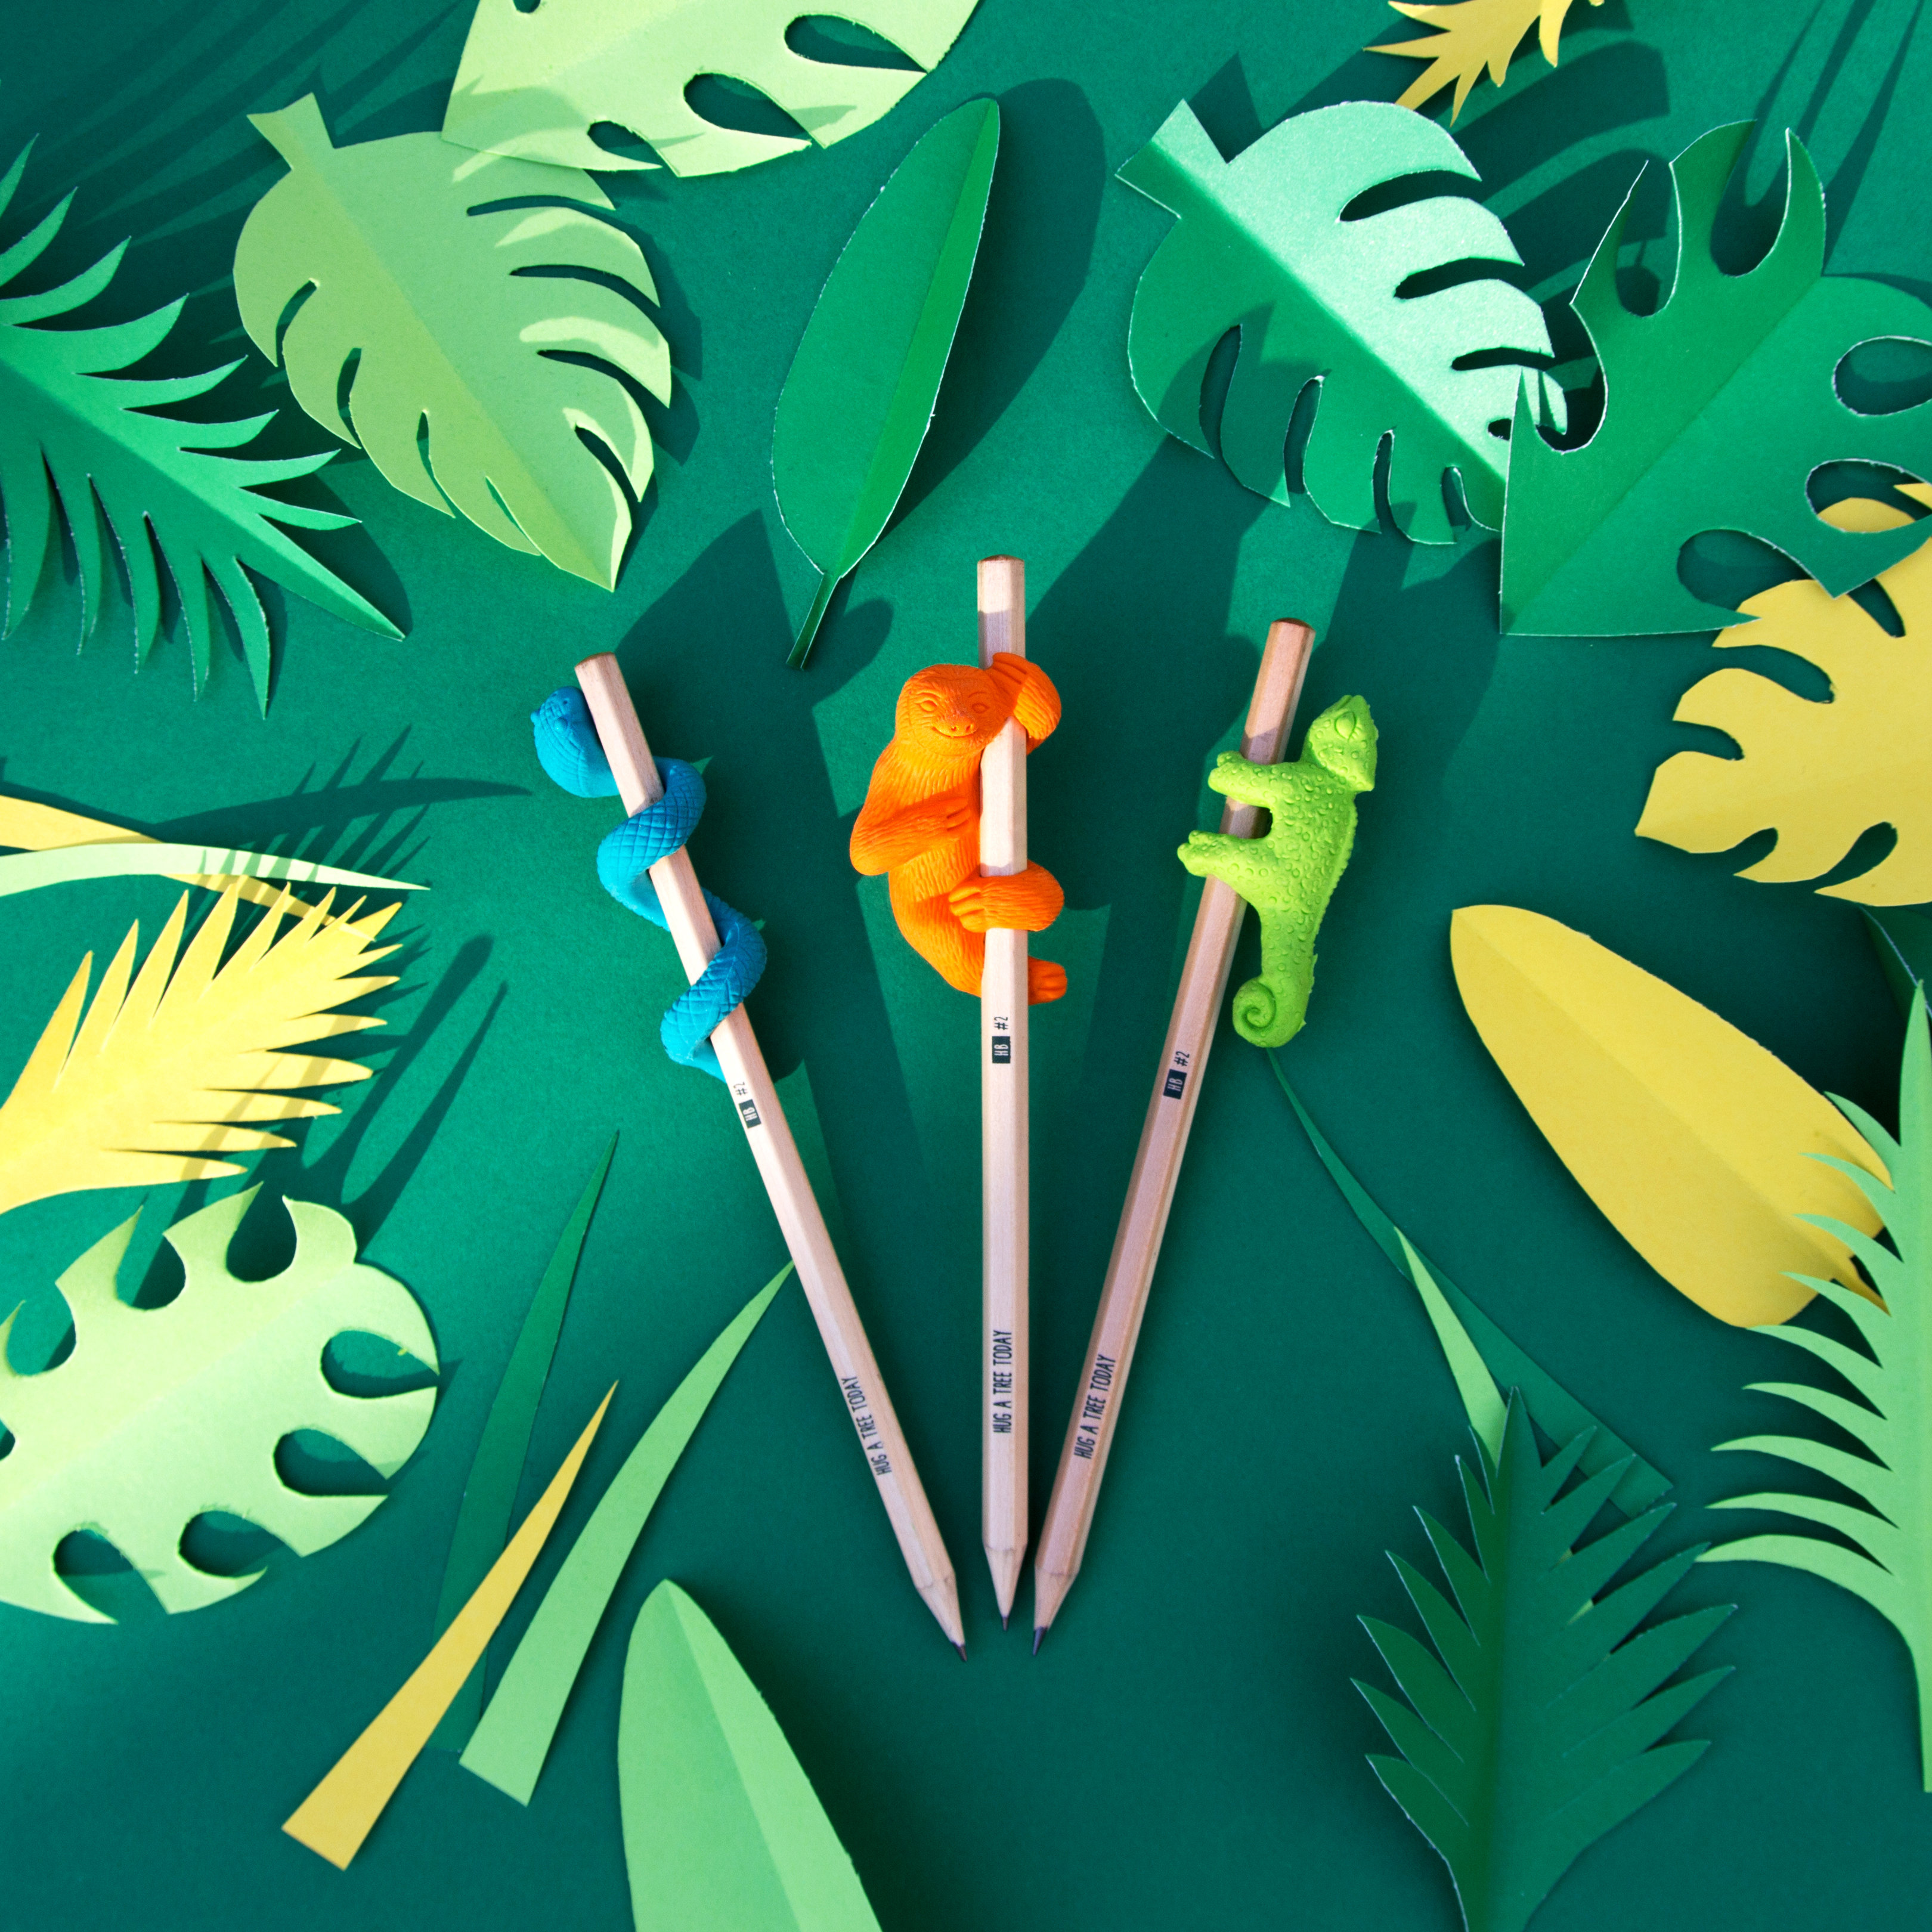 Jungle animal erasers on pencils with paper leaves